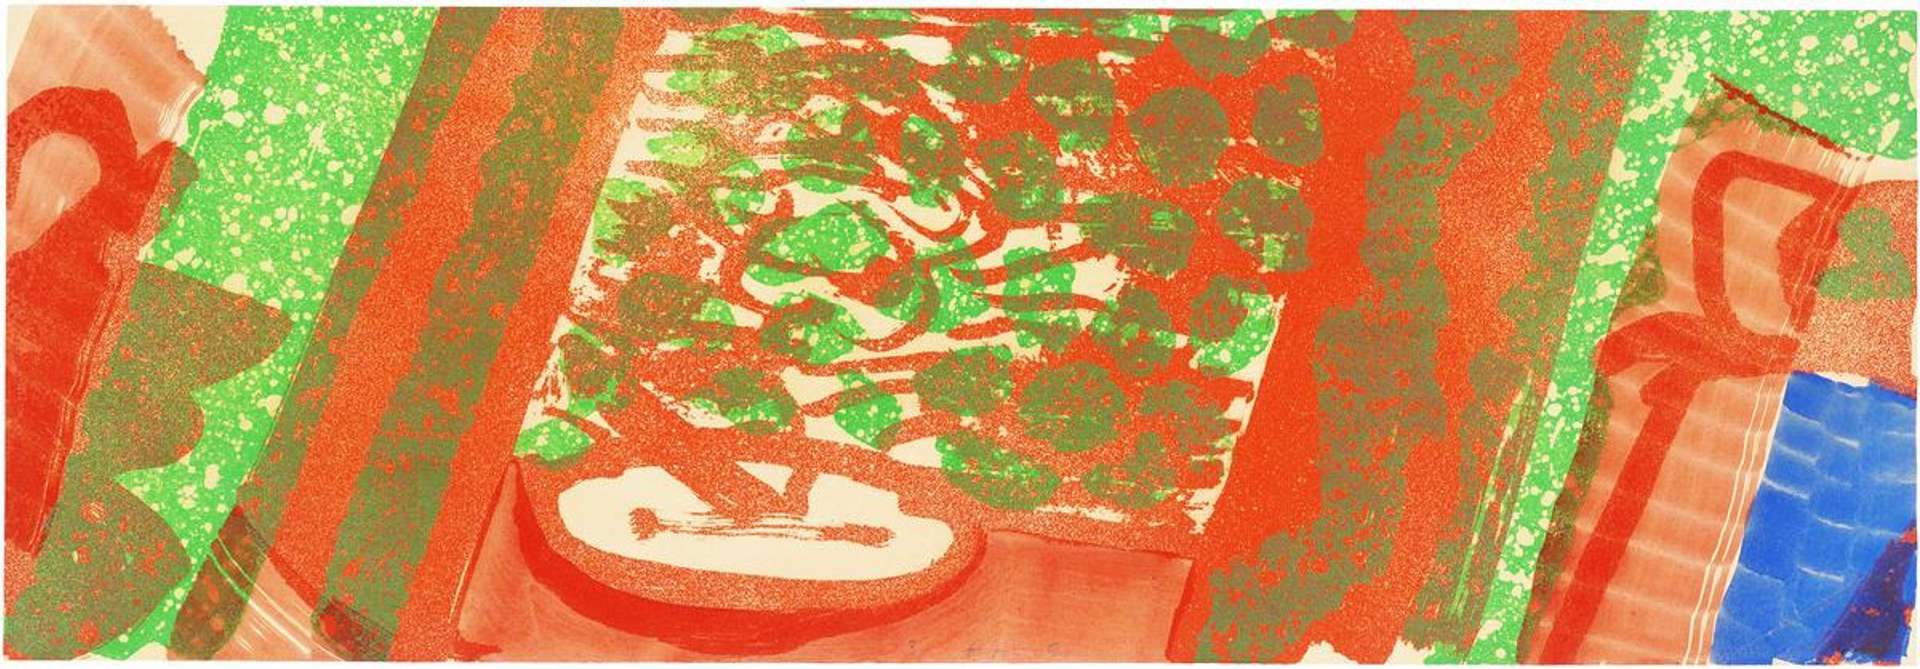 But He Did Stop Smoking / He Didn't Miss Cigarettes At All - Signed Print by Howard Hodgkin 1990 - MyArtBroker